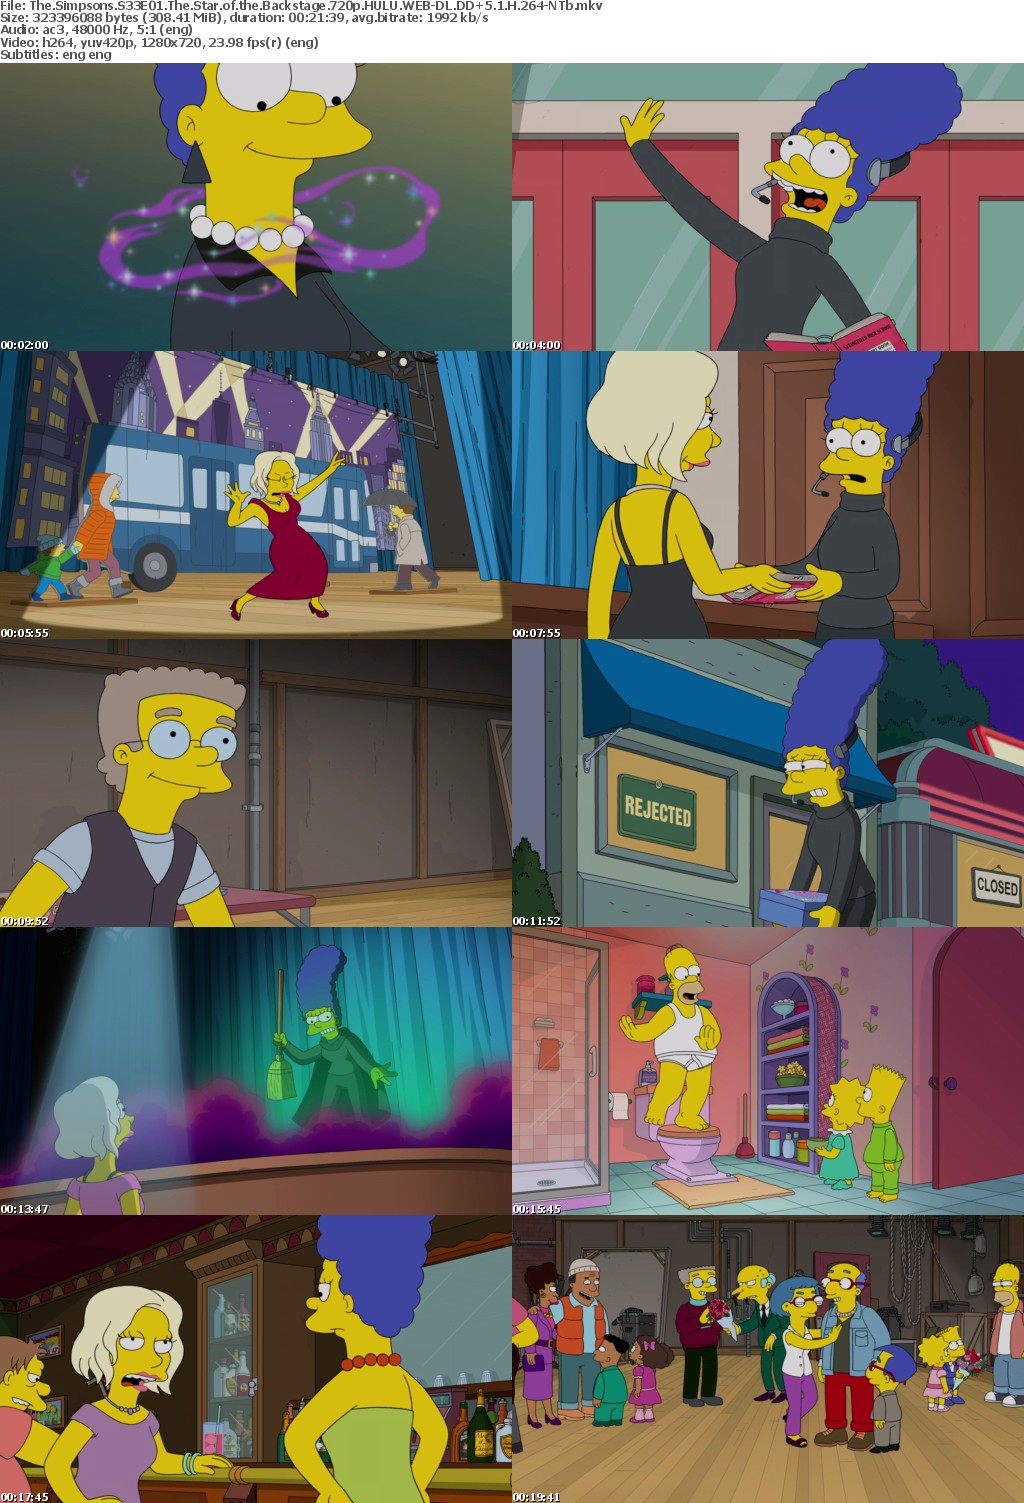 The Simpsons S33E01 The Star of the Backstage 720p HULU WEBRip DDP5 1 x264-NTb